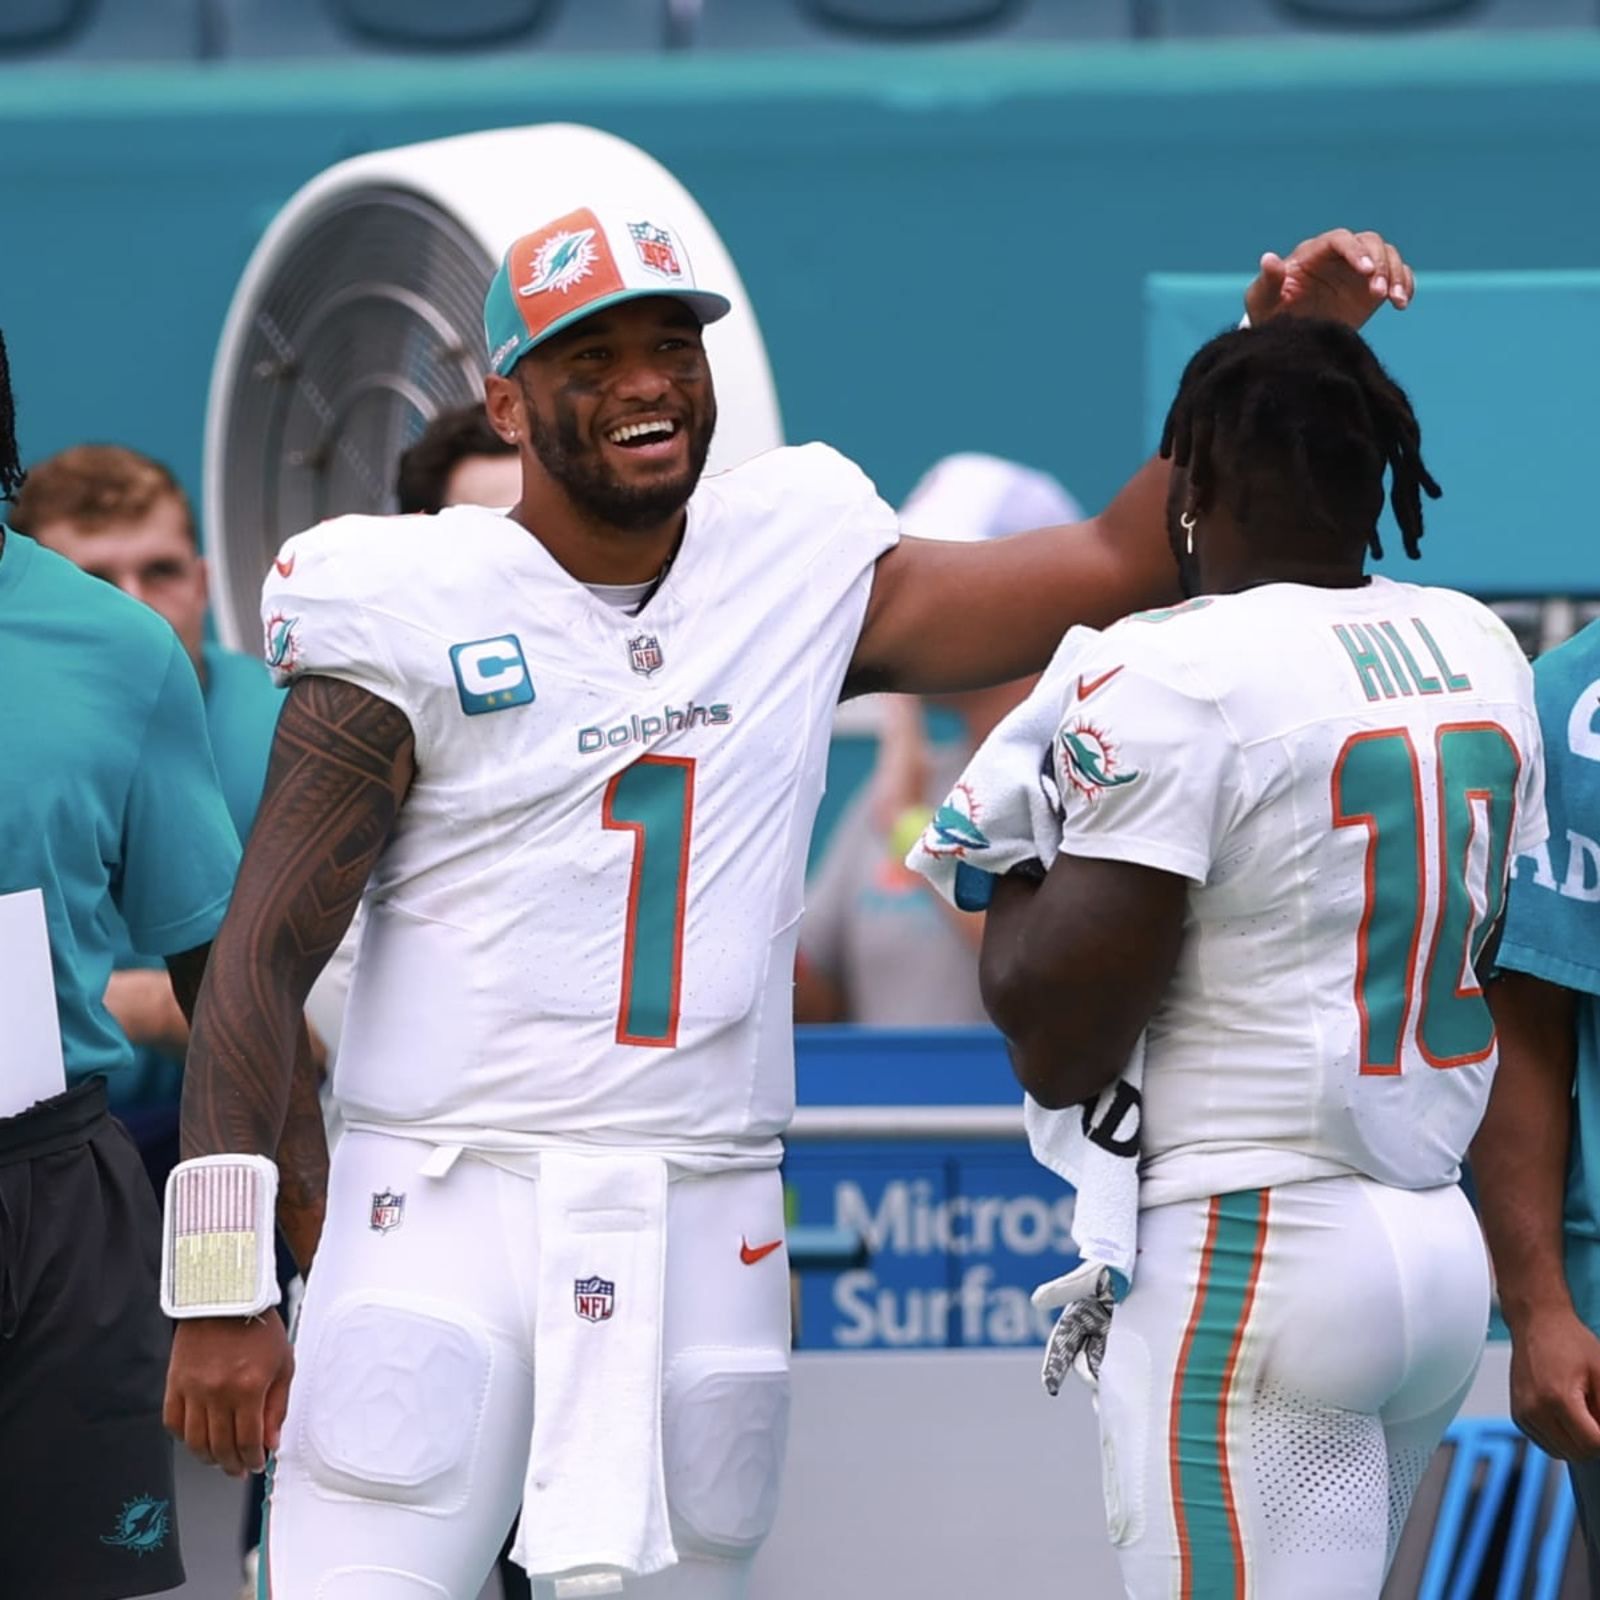 Thursday Night Football: Baltimore Ravens look to keep momentum at  struggling Miami Dolphins